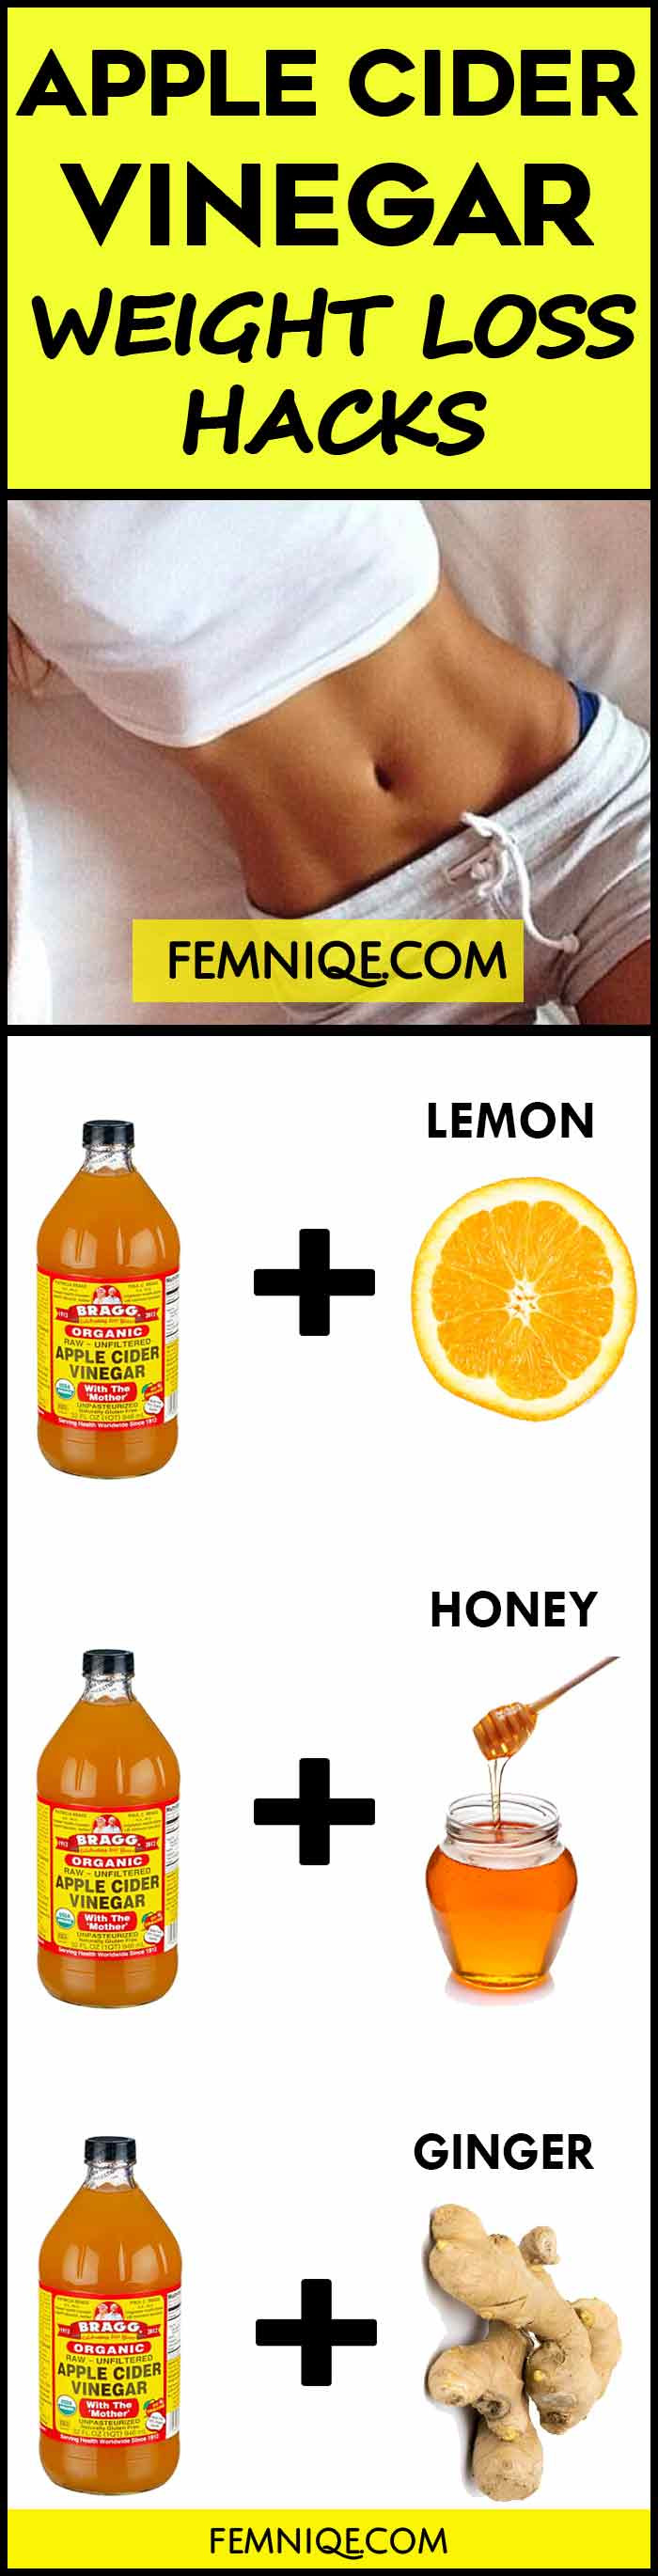 Apple Cider Vinegar And Weight Loss
 How To Use Apple Cider Vinegar for Weight Loss Femniqe